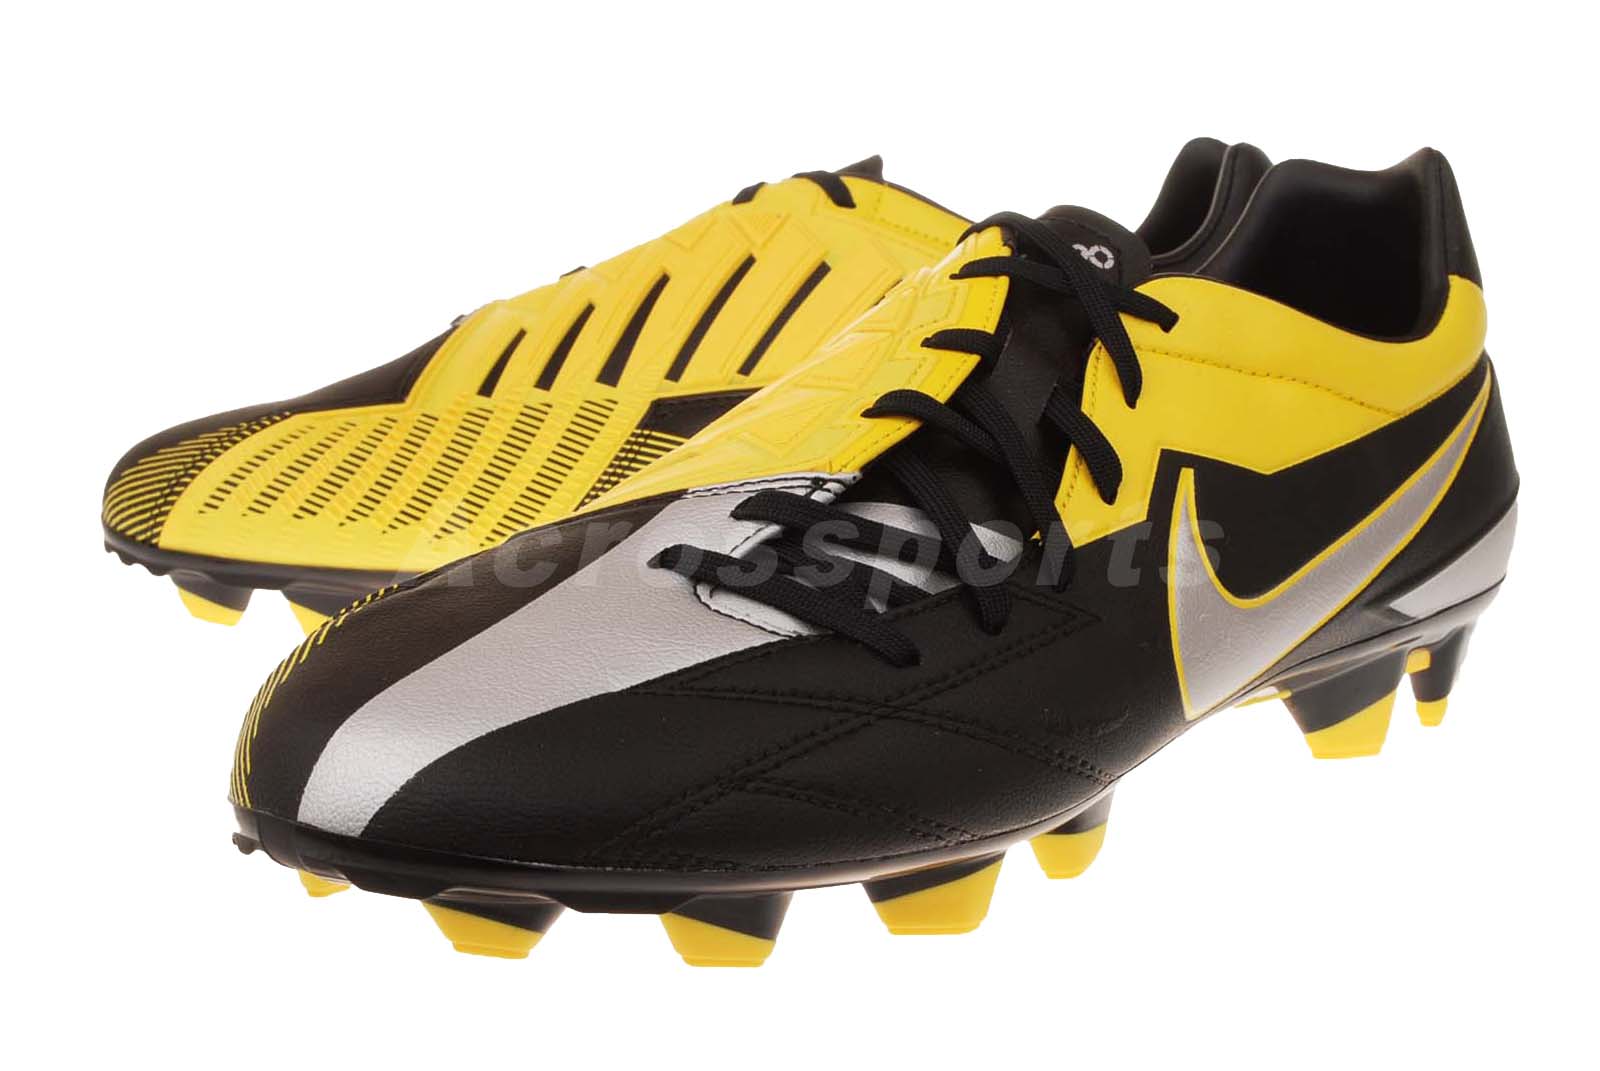 Nike T90 Strike IV FG Black Yellow Silver Mens Soccer Cleats Shoes 472562 007   US Size 8.5